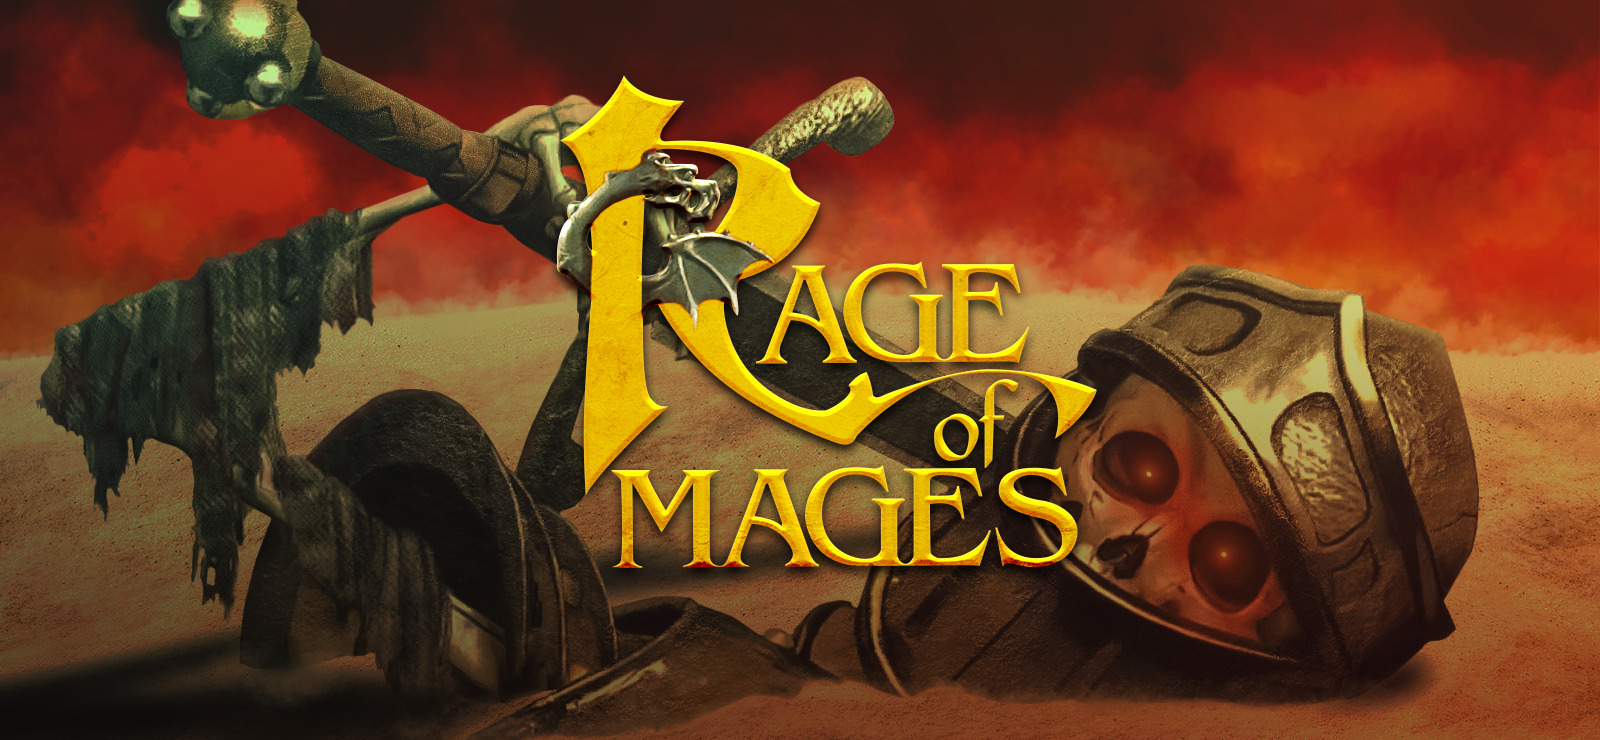 Rage of mages steam (119) фото